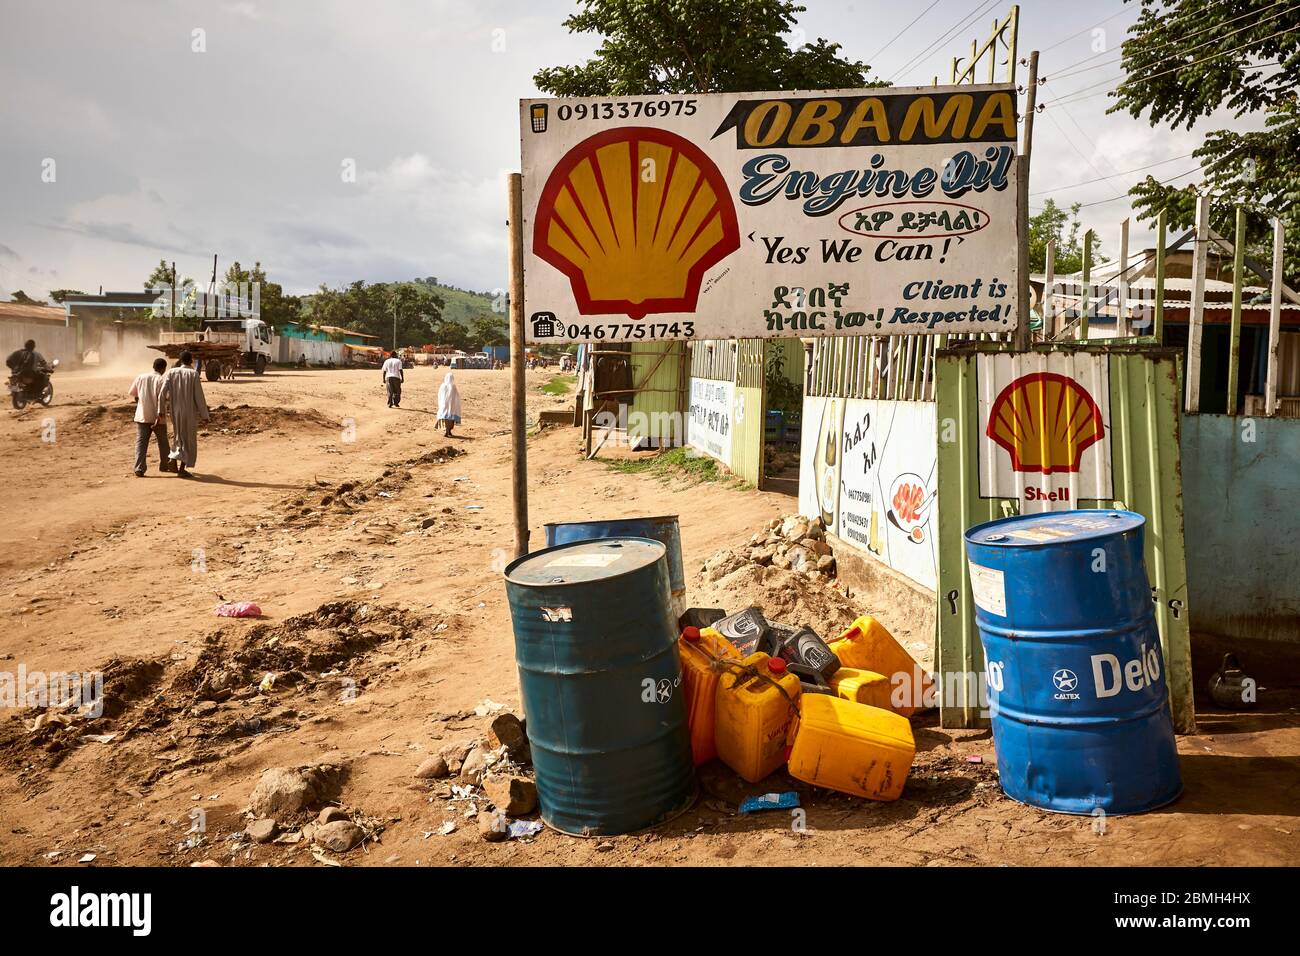 'Yes we can' - Obama filling station in Turmi. Even the clients will be respected. Stock Photo